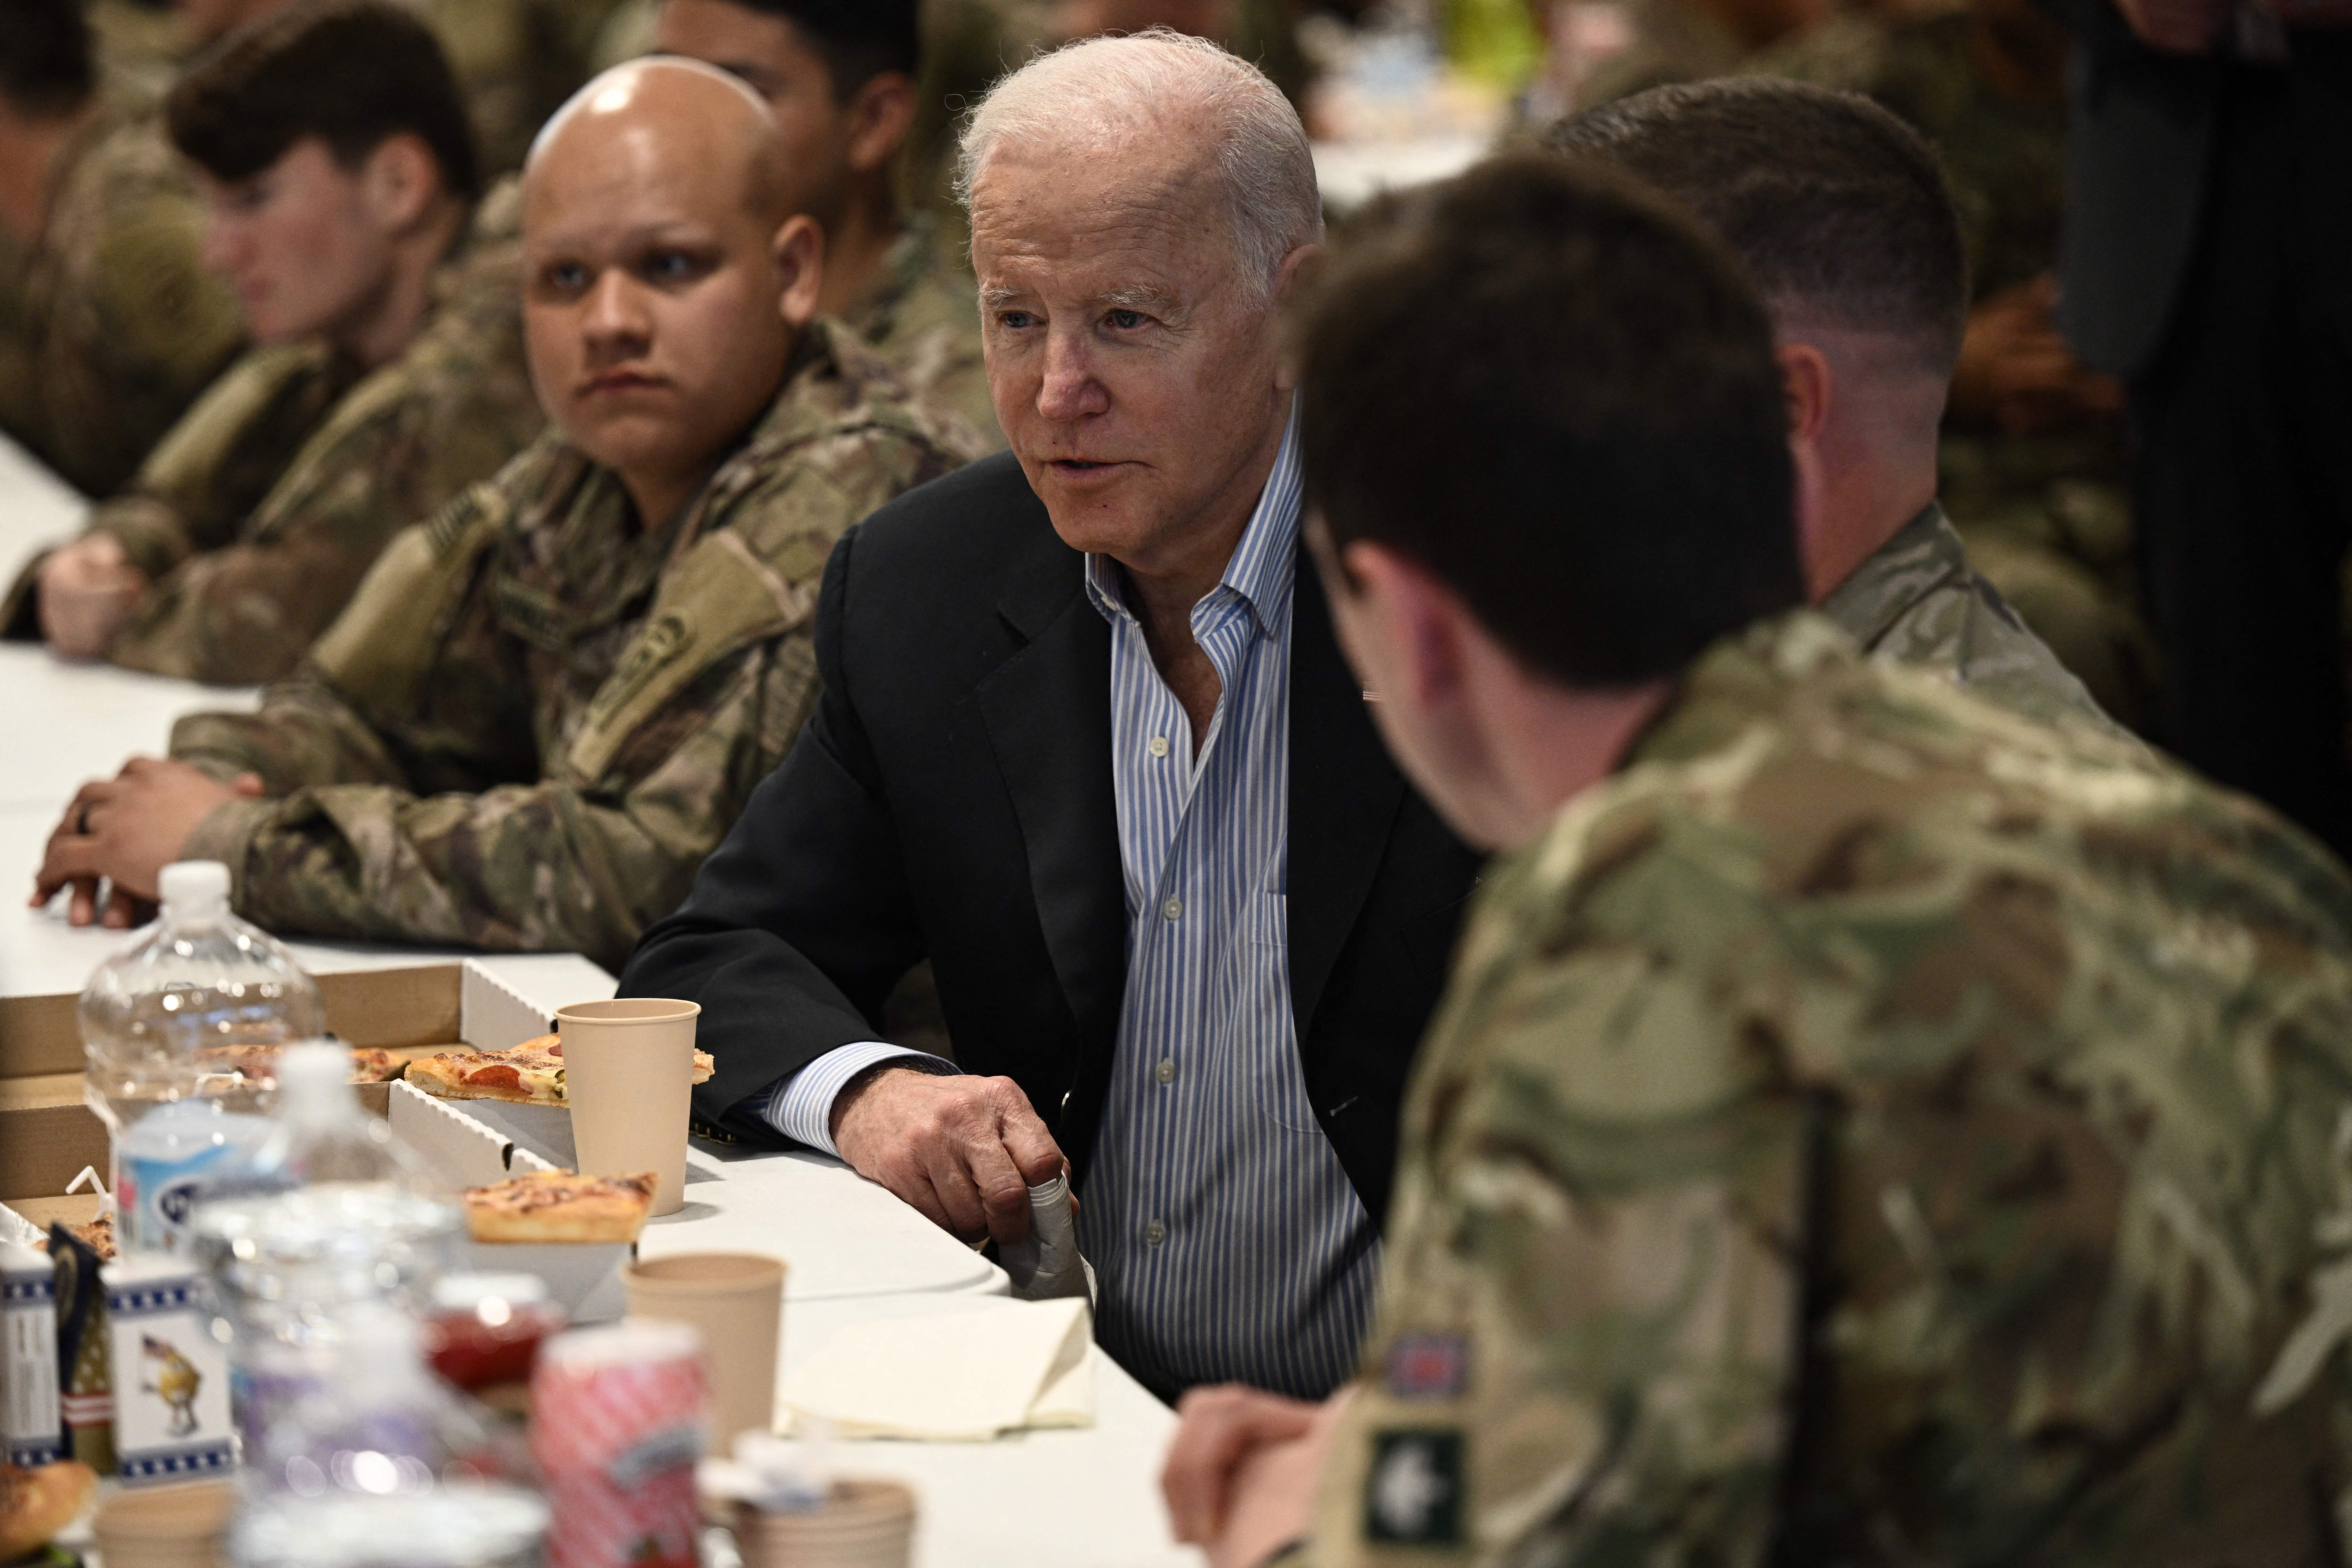 US President Joe Biden, center, talks to service members from the 82nd Airborne Division during his trip to Poland on March 25.